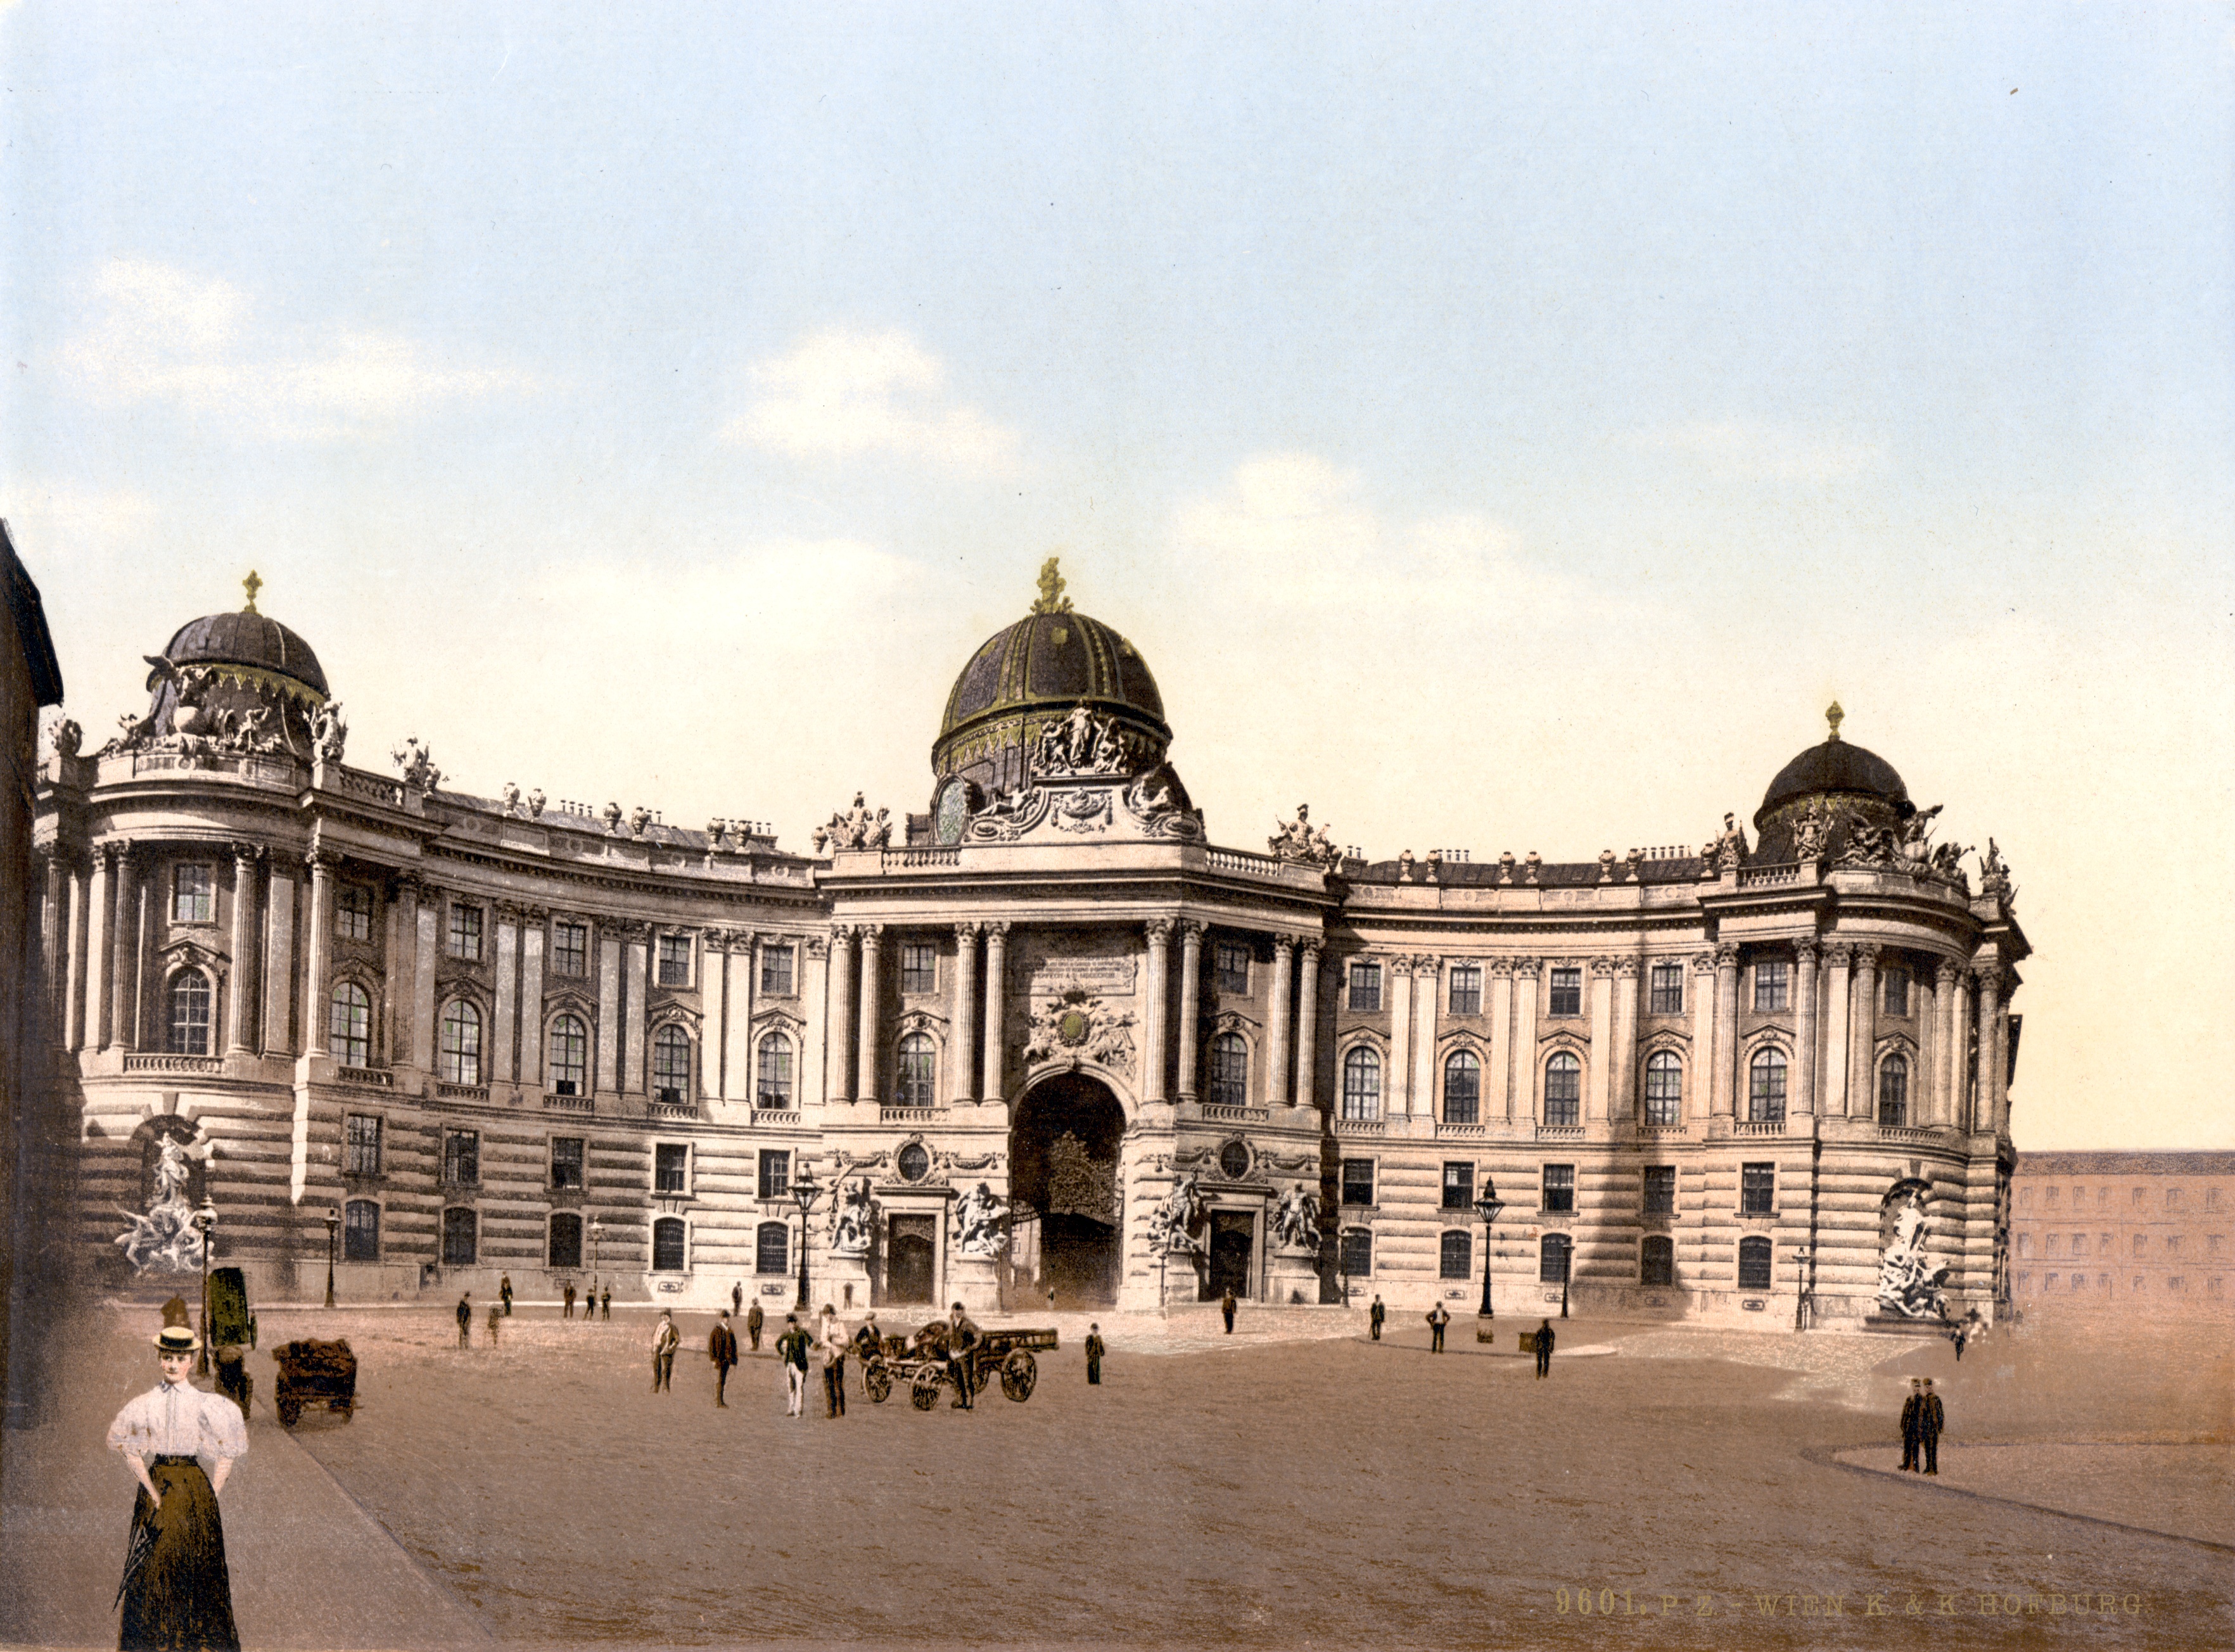 Wien Hofburg um 1900 - Historical panorama of the Michaelertrakt wing of the Imperial Hofburg Palace in Vienna (between 1890 and 1900).